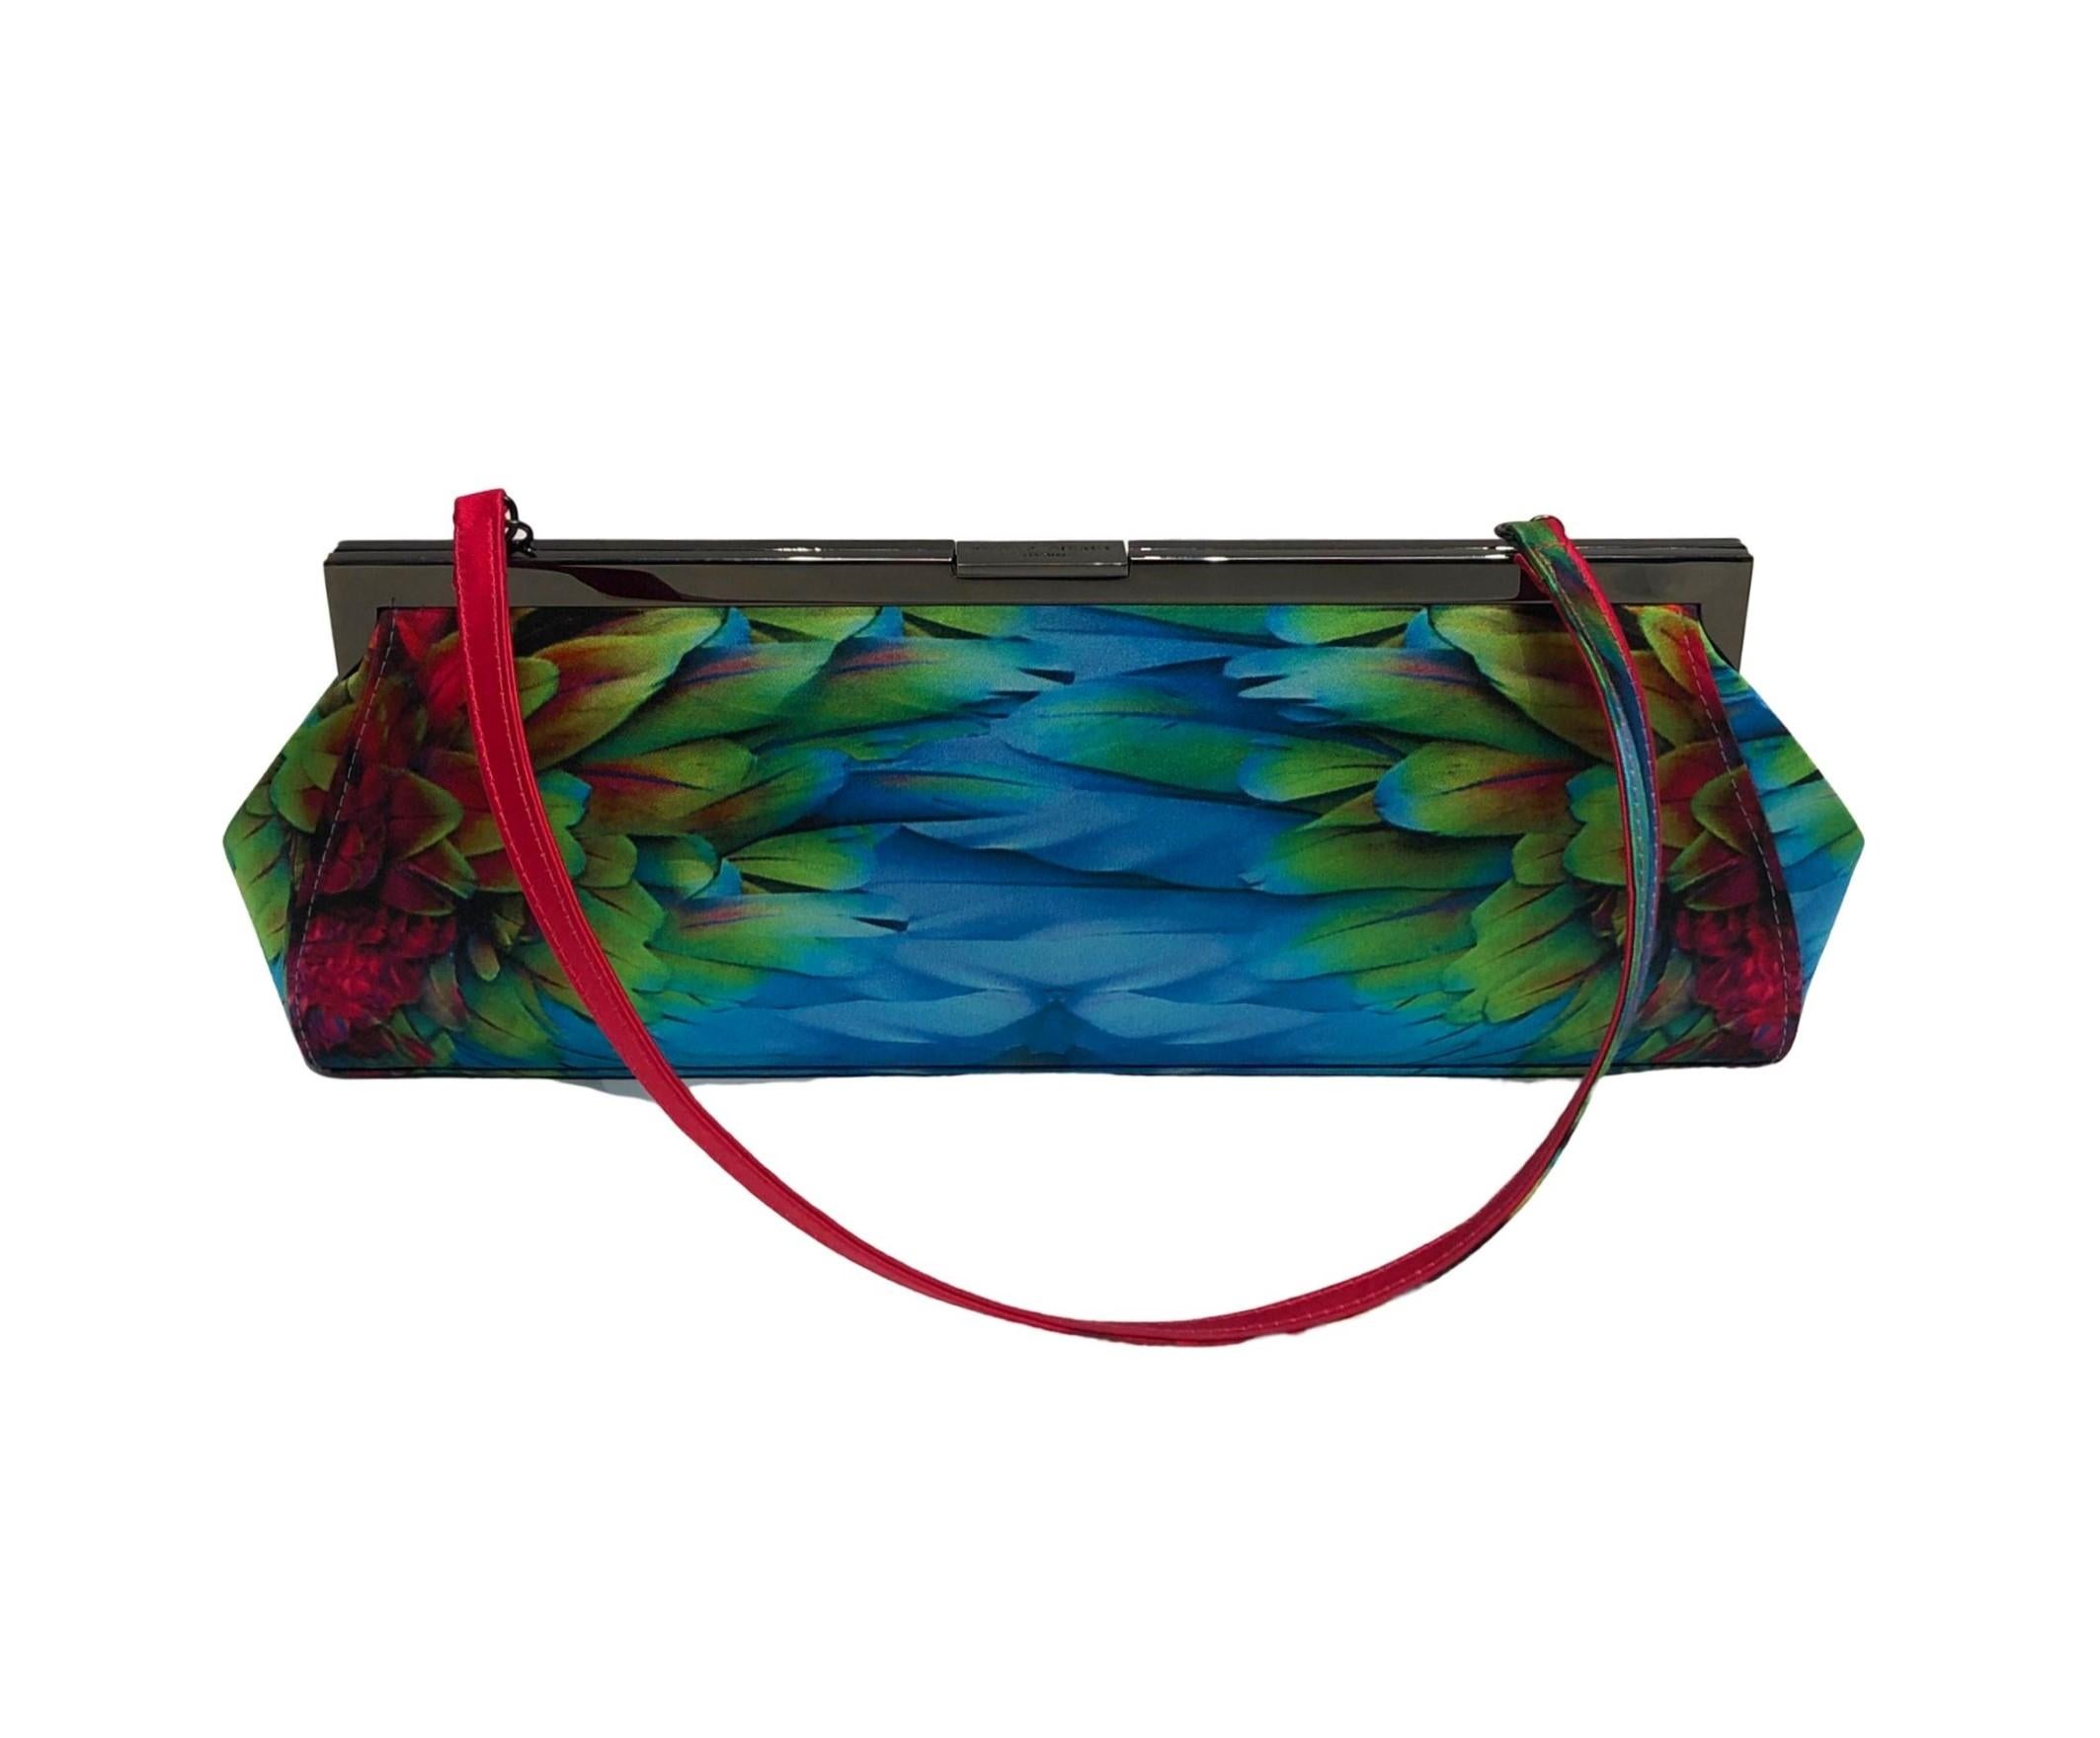 Light up the room with this incredibly vibrant Philip Treacy evening bag made from gorgeous printed silk featuring a colourful feather design, bright pink strap, gunmetal hardware and interior zip pocket.